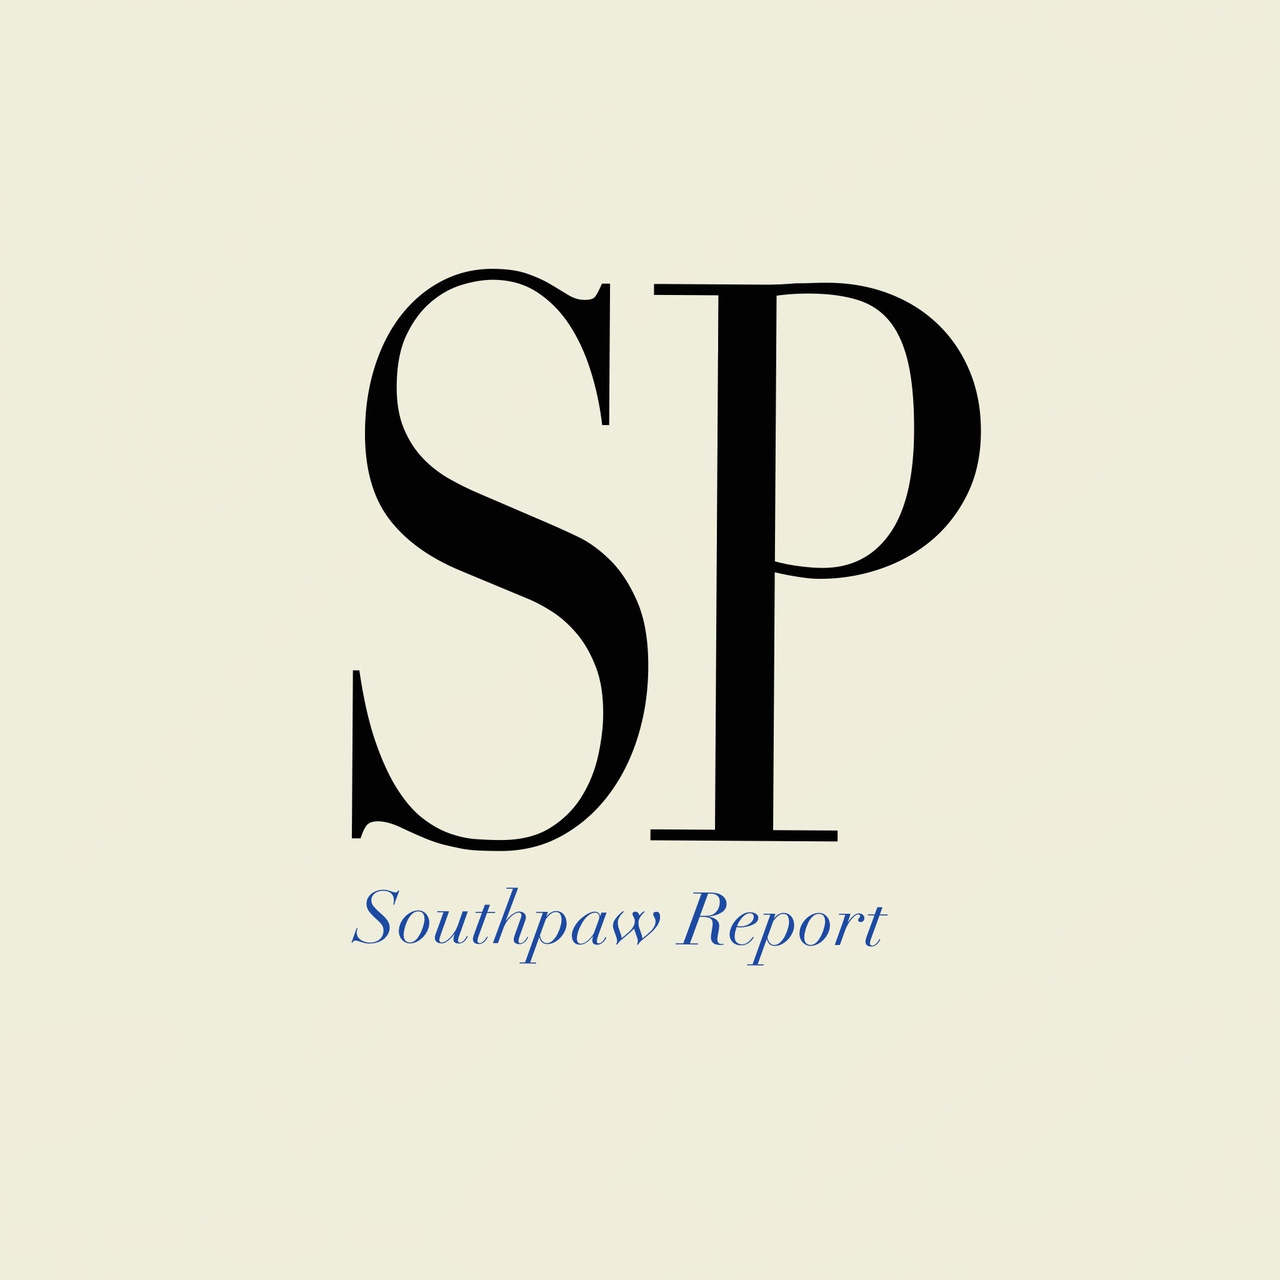 Southpaw Report